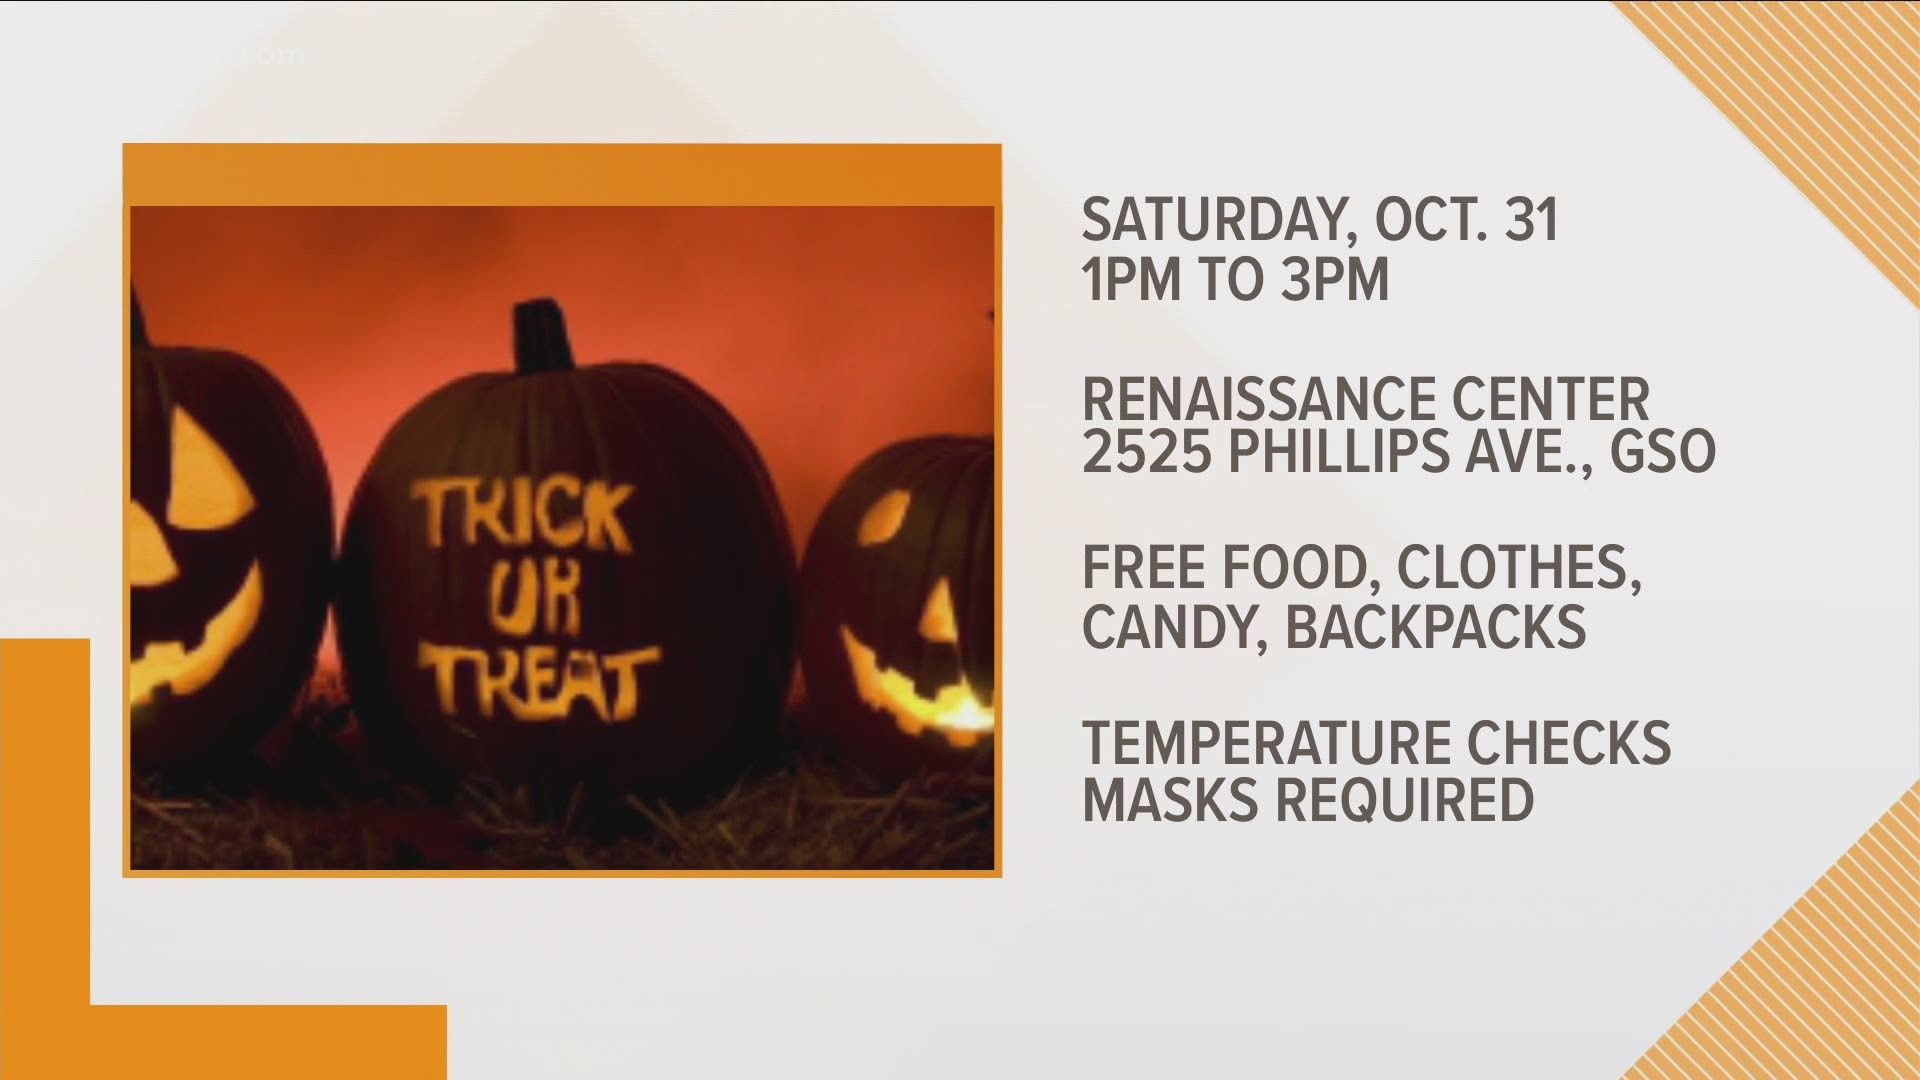 Several communities are holding drive-thru Halloween events, but one Greensboro event is also giving away clothes and food.